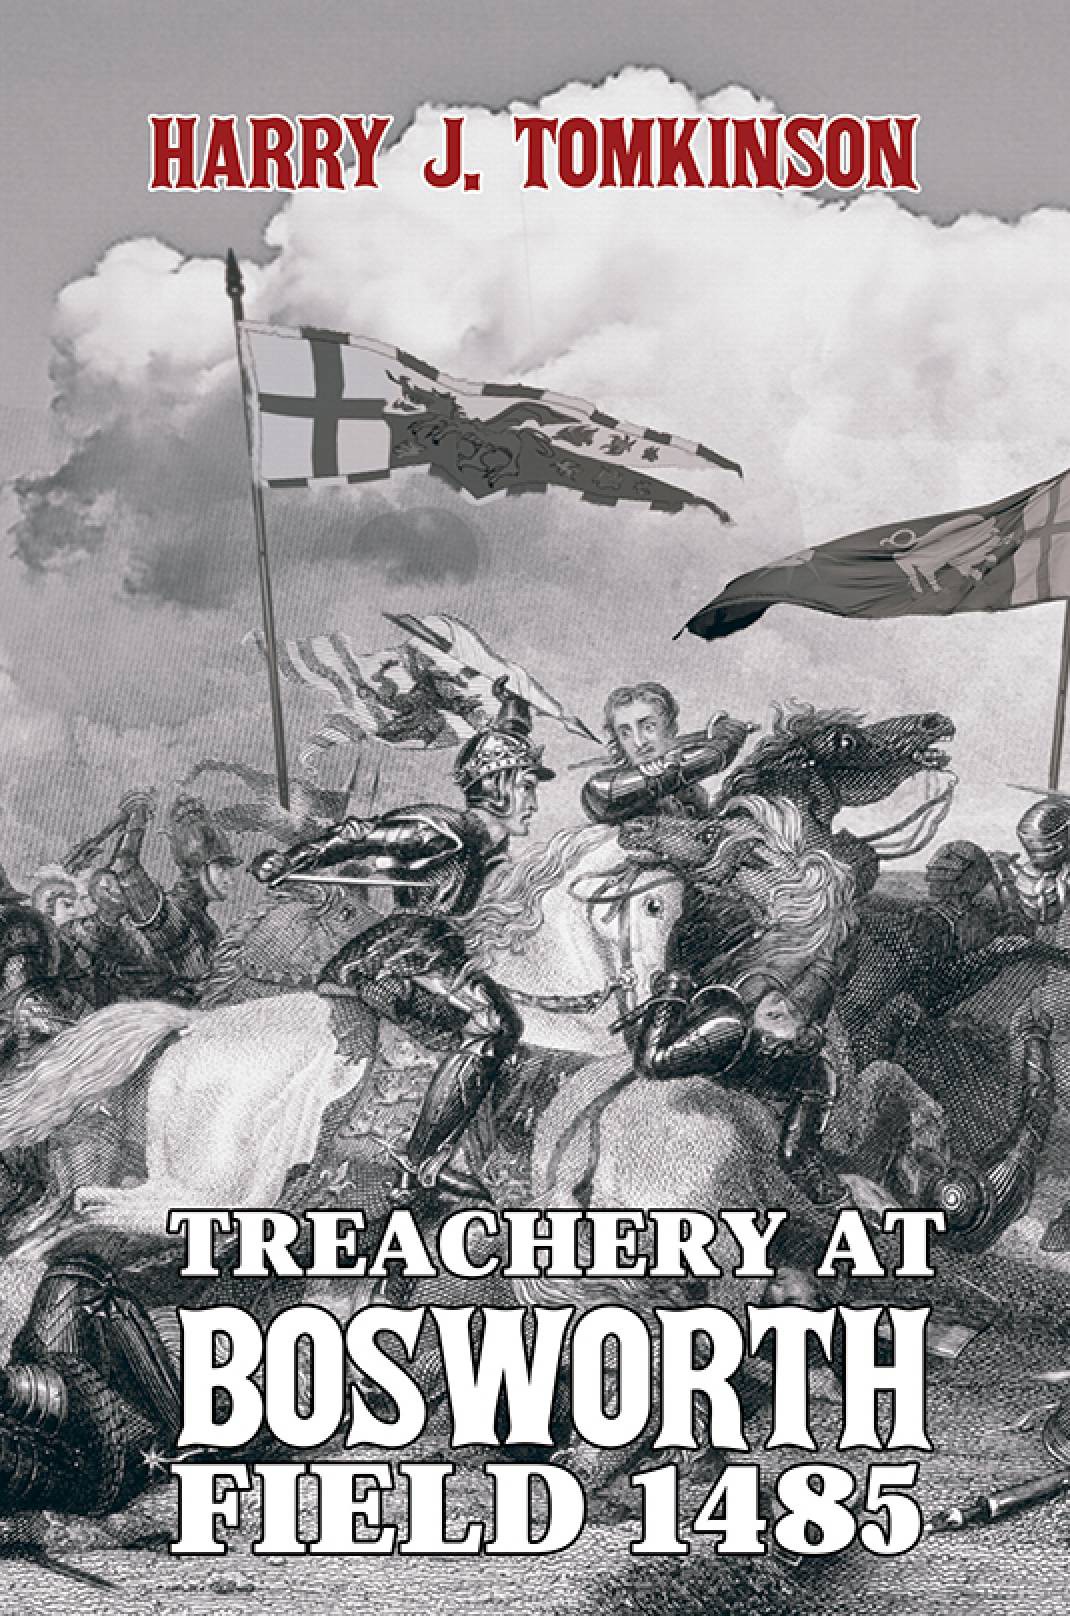 Harry Tomkinson had a talk about his book Treachery at Bosworth Field 1485